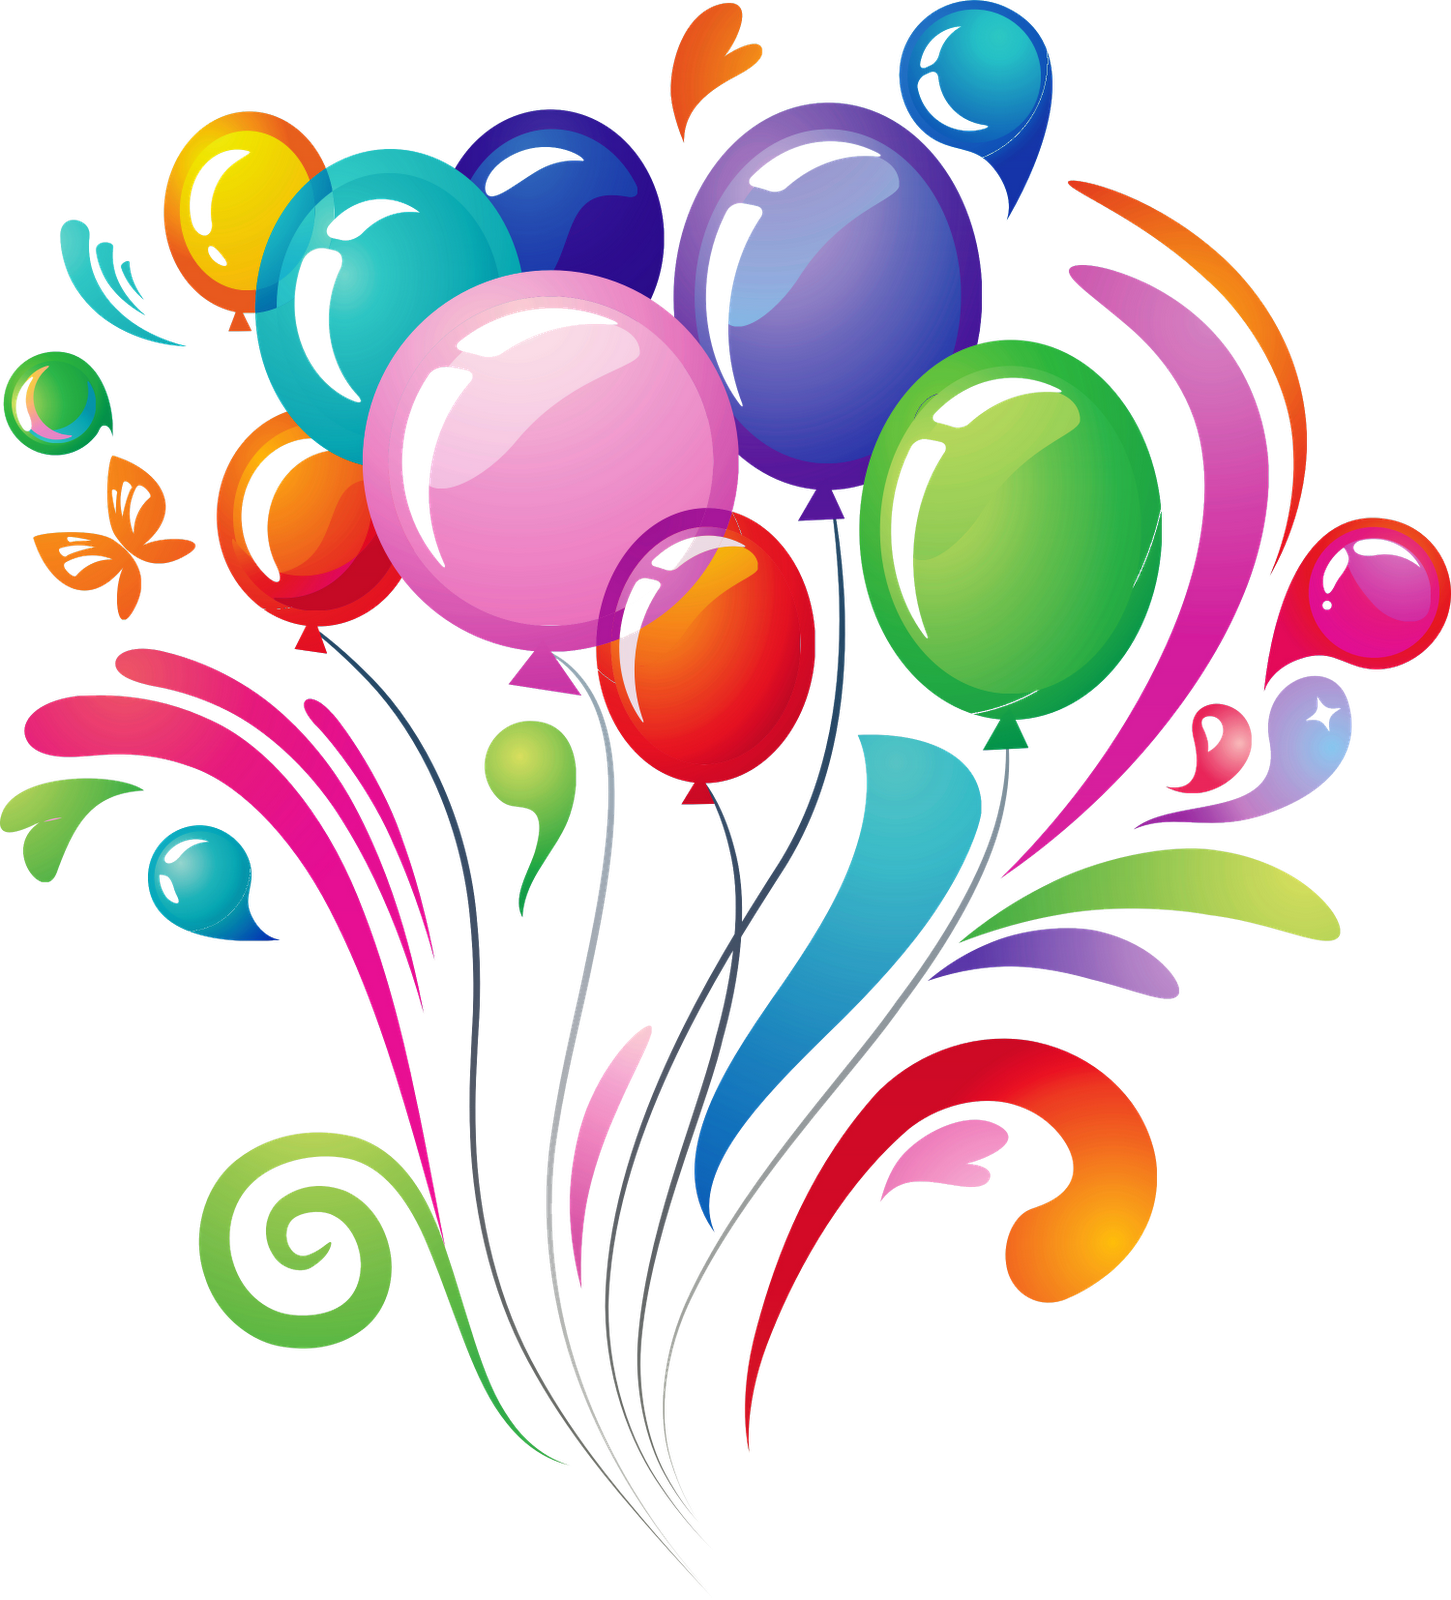 free clipart balloons party - photo #24